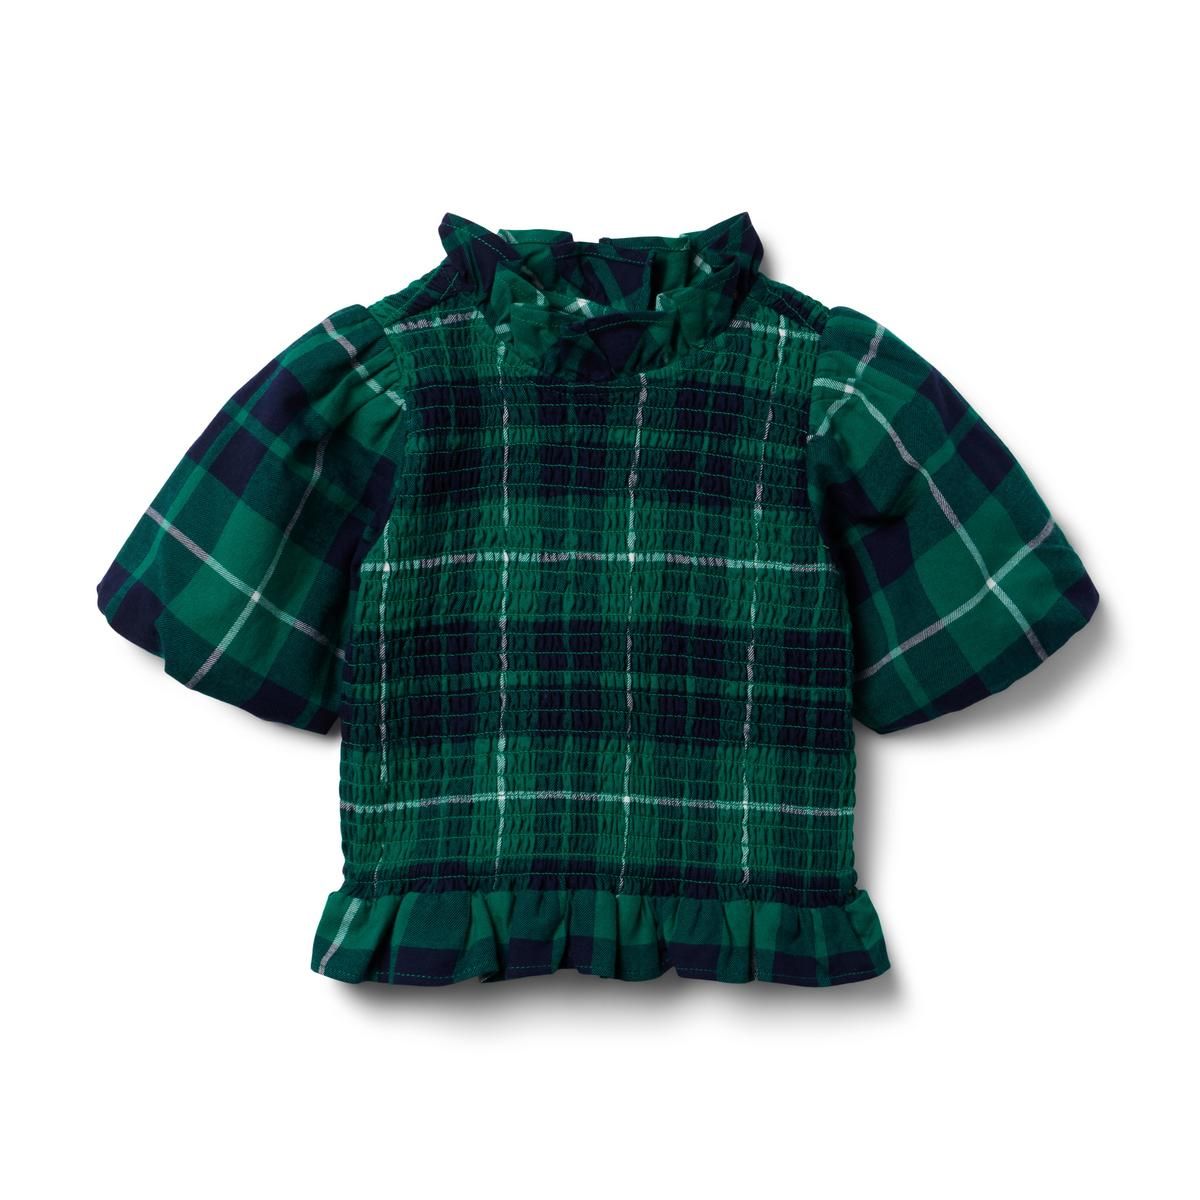 The Tartan Holiday Smocked Top | Janie and Jack